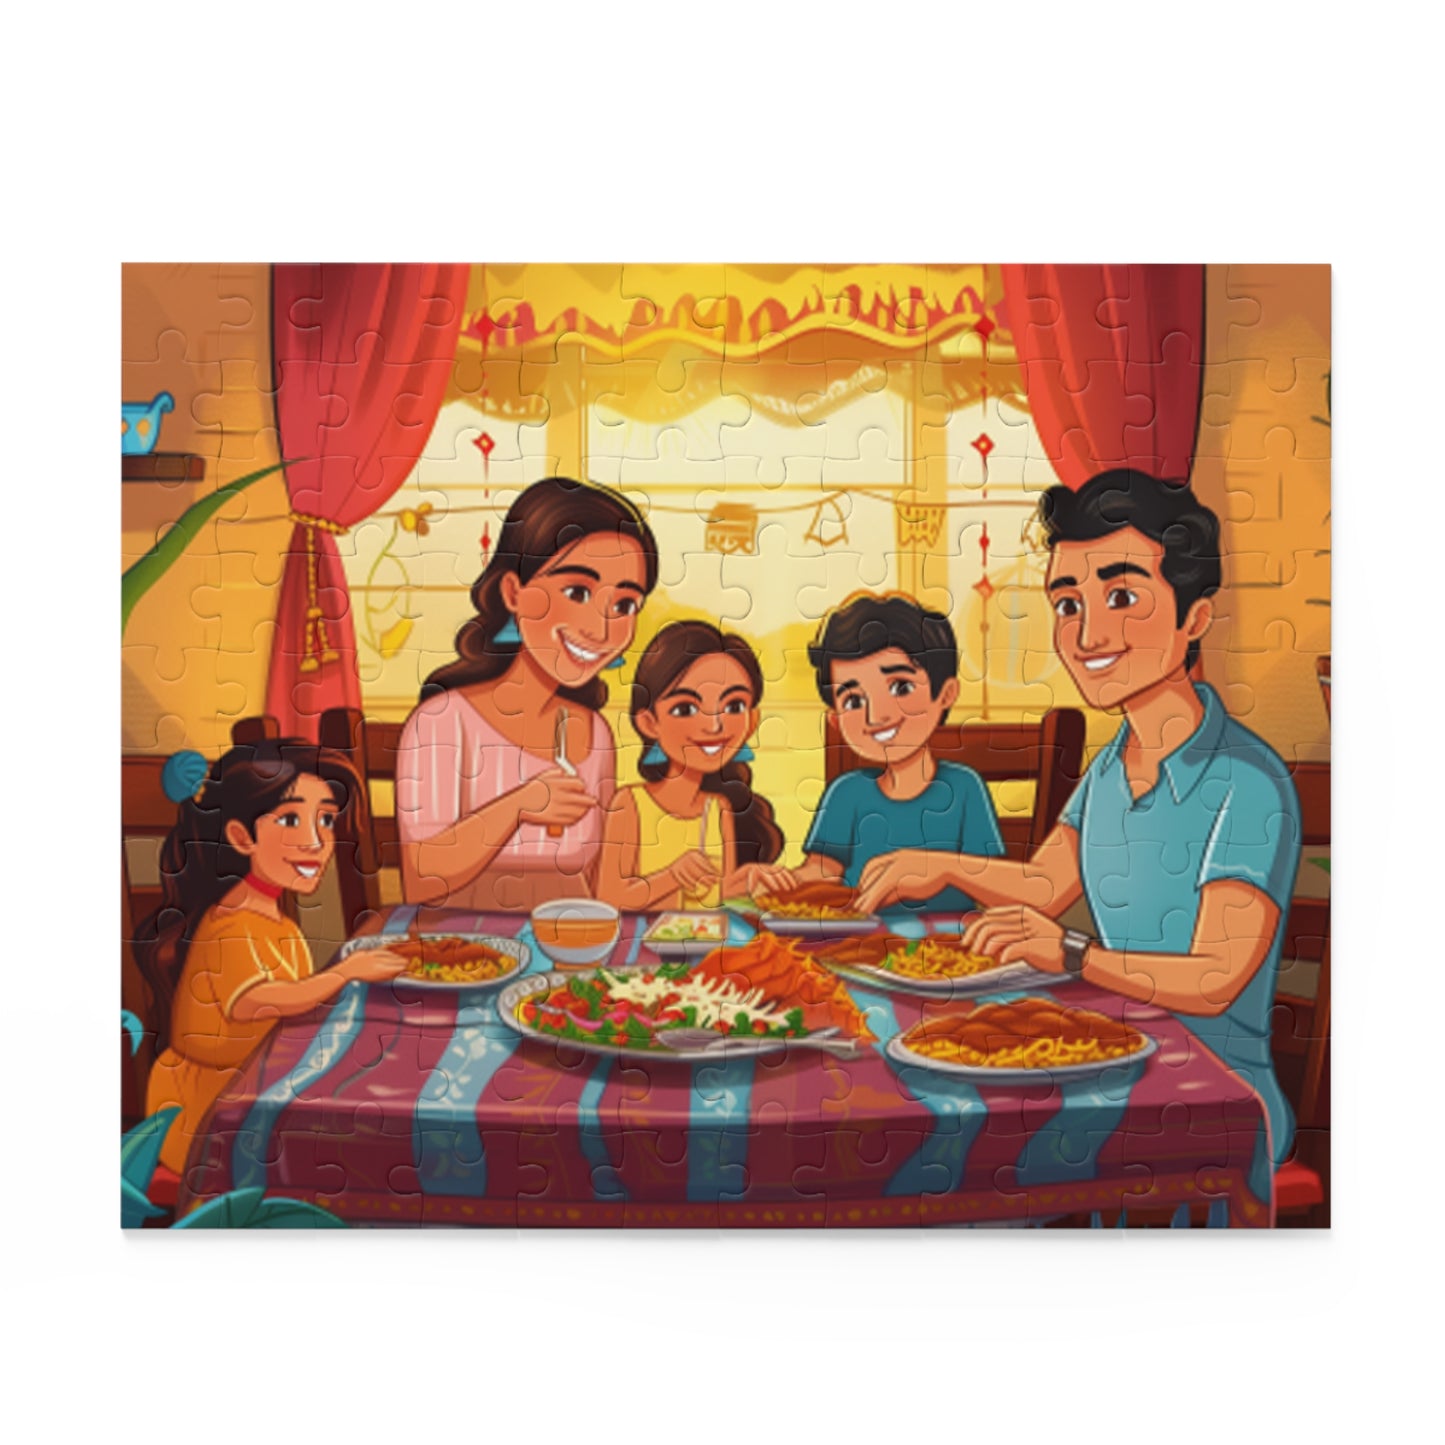 Mexican Family Retro Art Jigsaw Puzzle Adult Birthday Business Jigsaw Puzzle Gift for Him Funny Humorous Indoor Outdoor Game Gift For Her Online-2